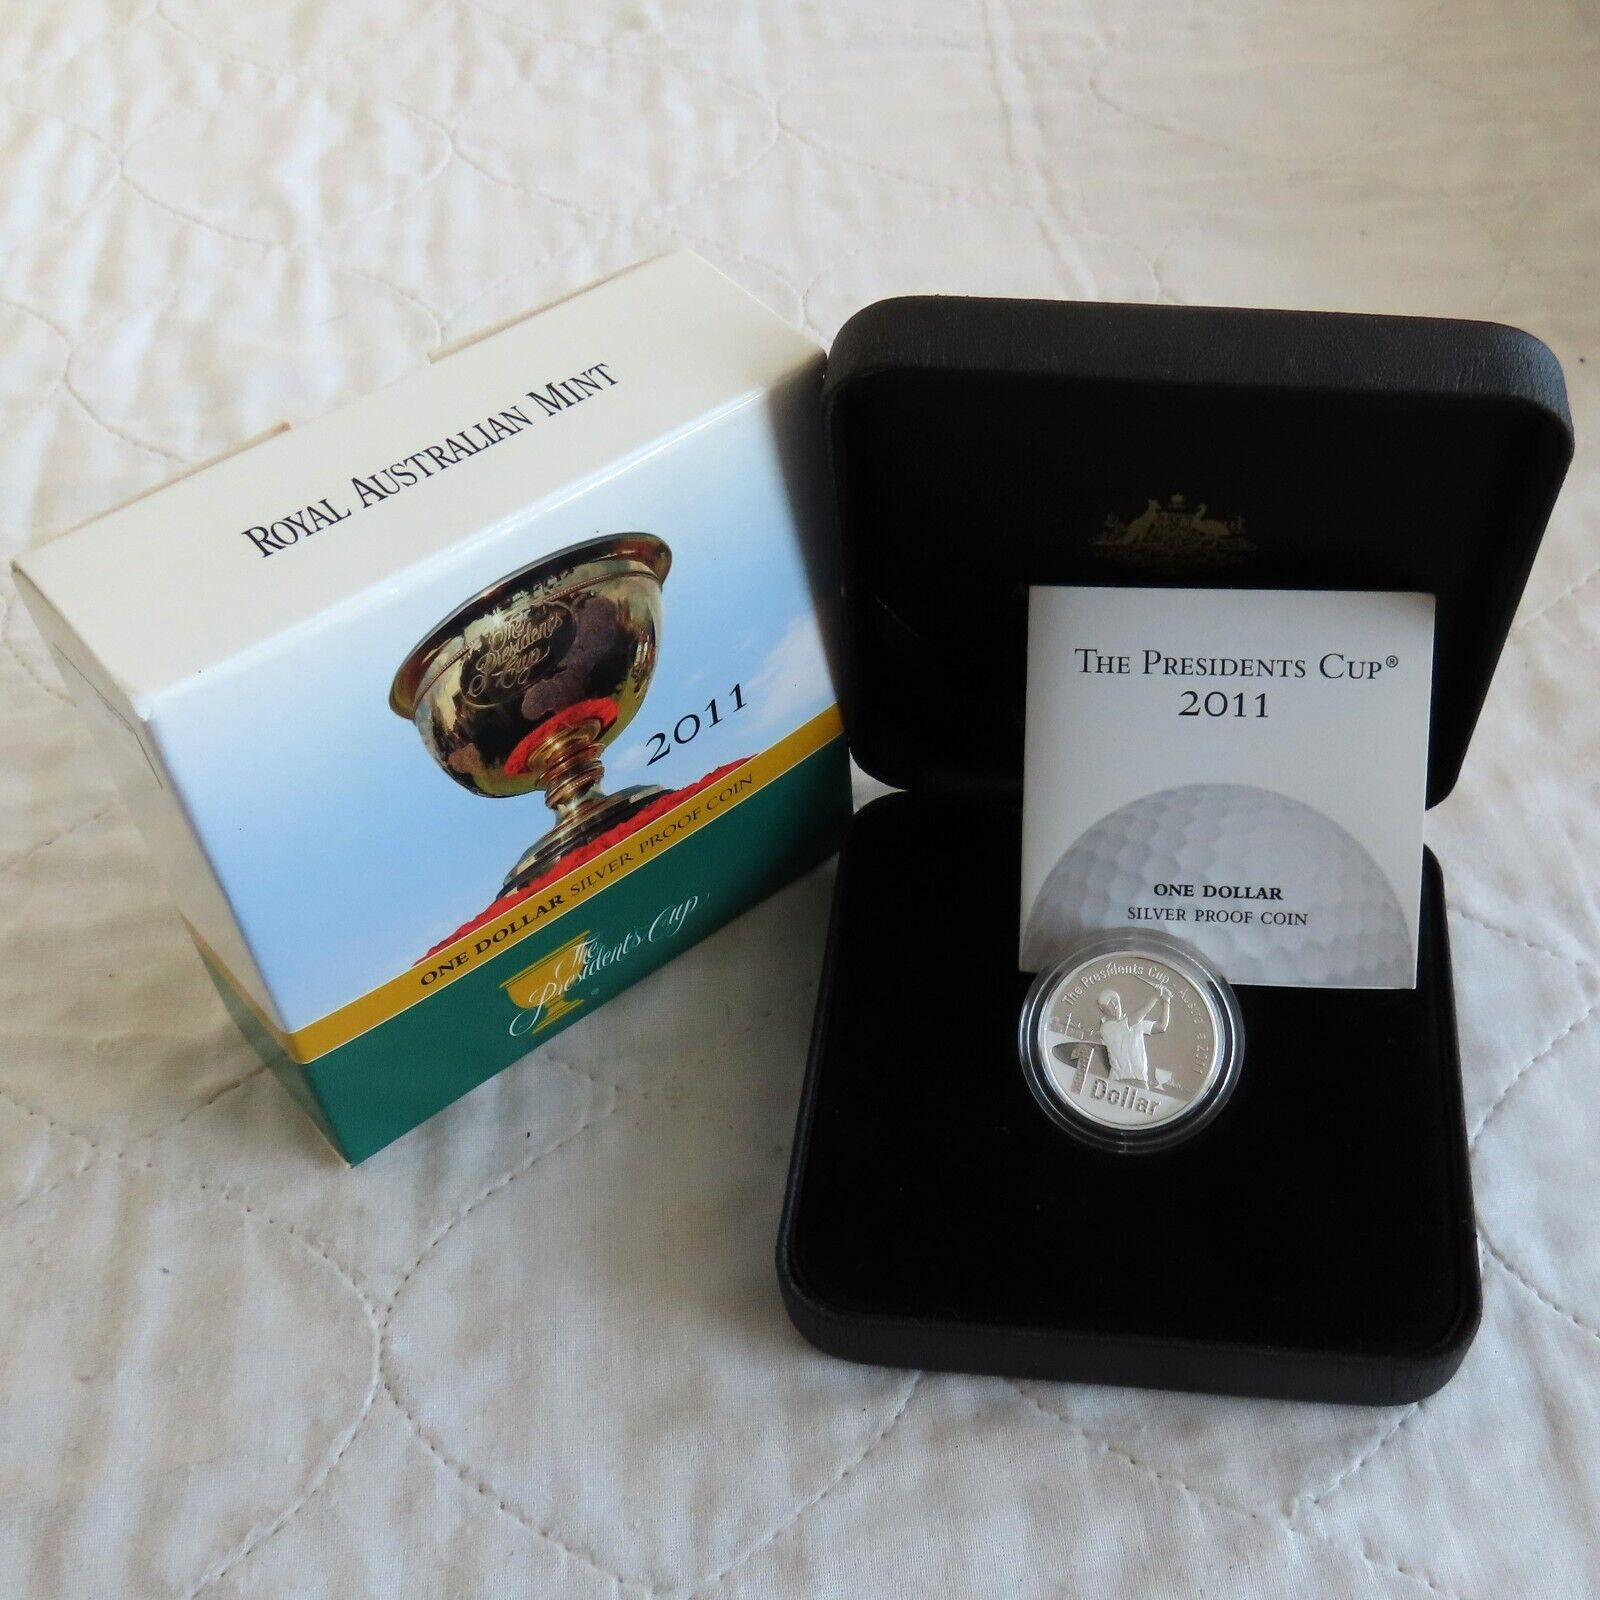 AUSTRALIA 2011 THE PRESIDENTS CUP .999 FINE SILVER PROOF DOLLAR - complete